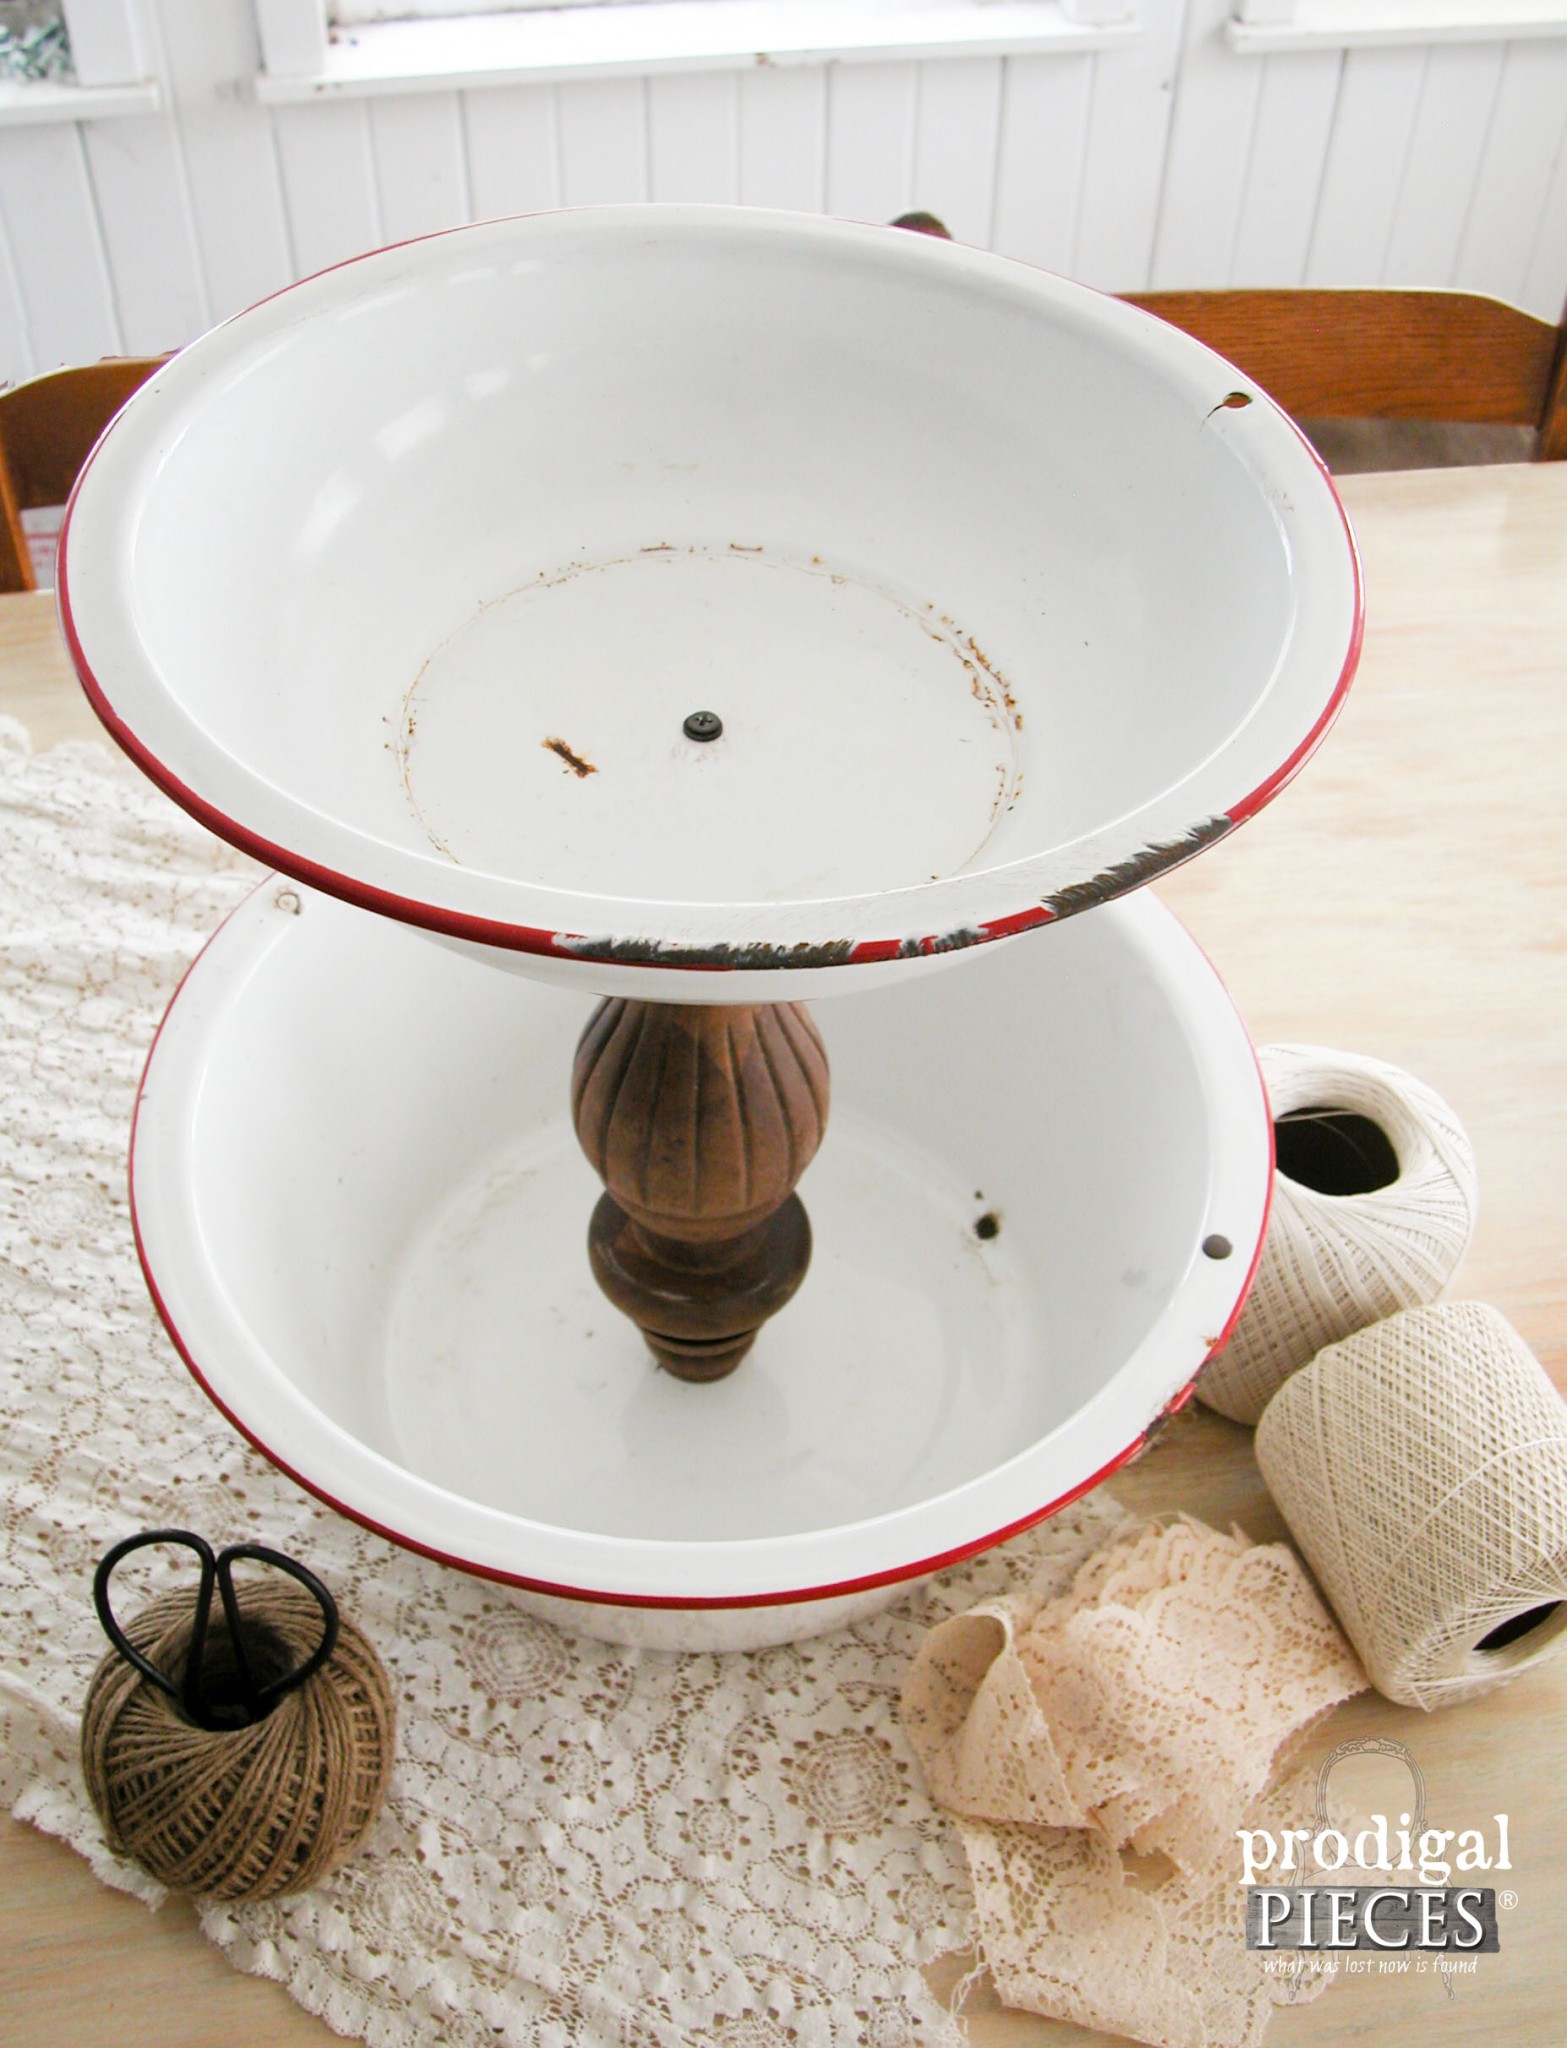 Red and White Enamelware Basin Repurposed into Stand by Prodigal Pieces | www.prodigalpieces.com